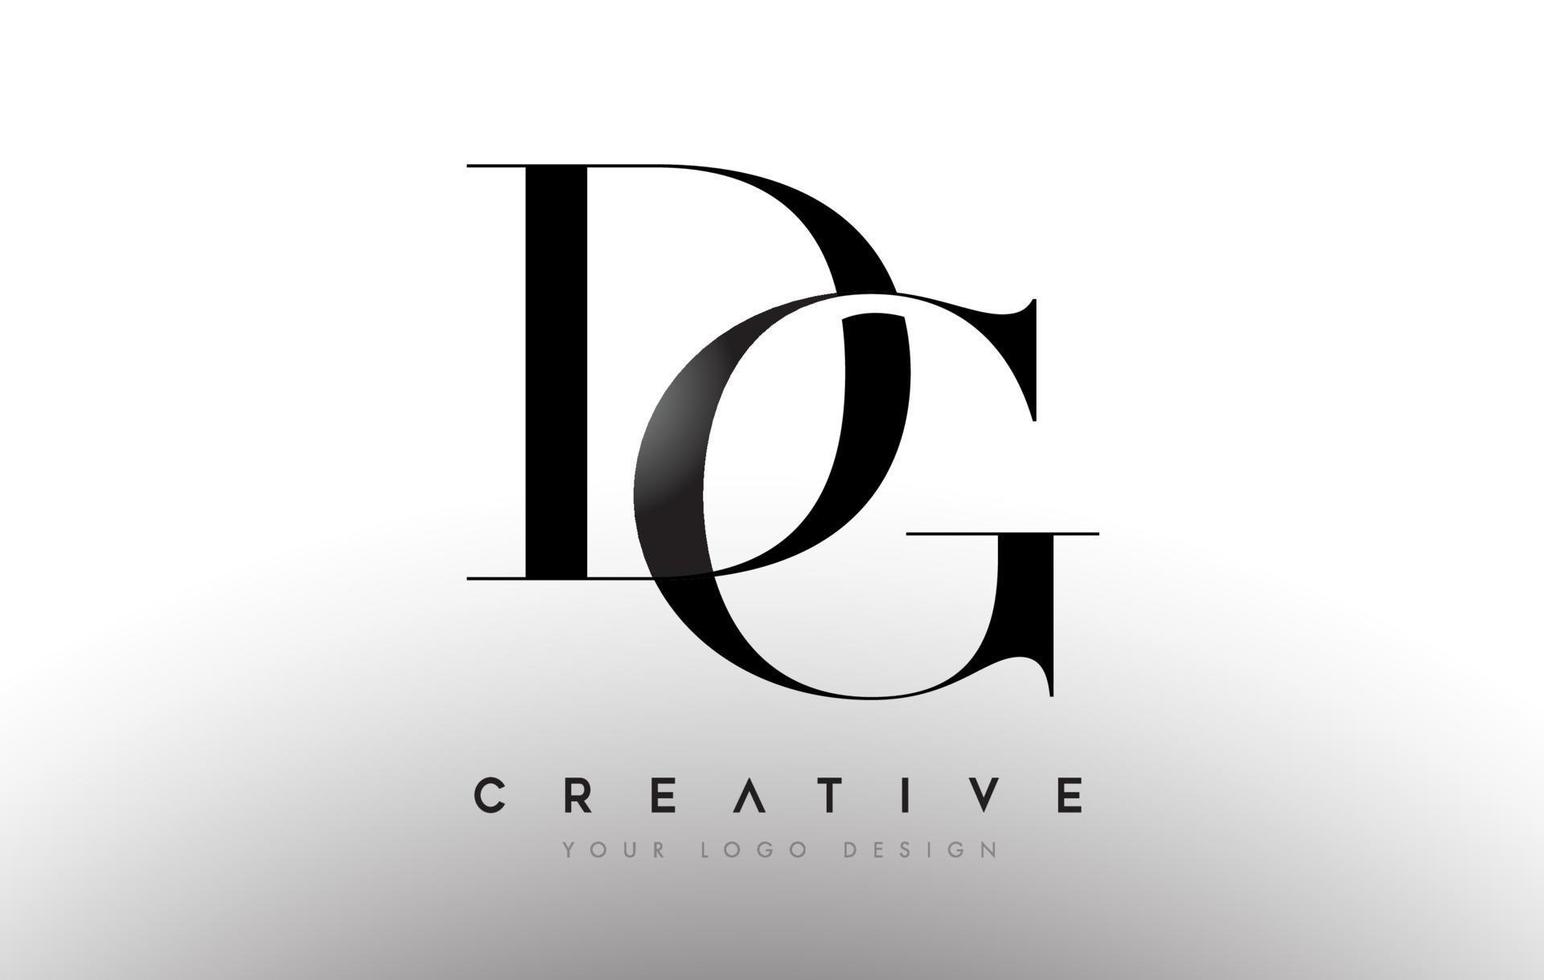 Dg Dg Letter Design Logo Logotype Icon Concept With Serif Font And Classic Elegant Style Look